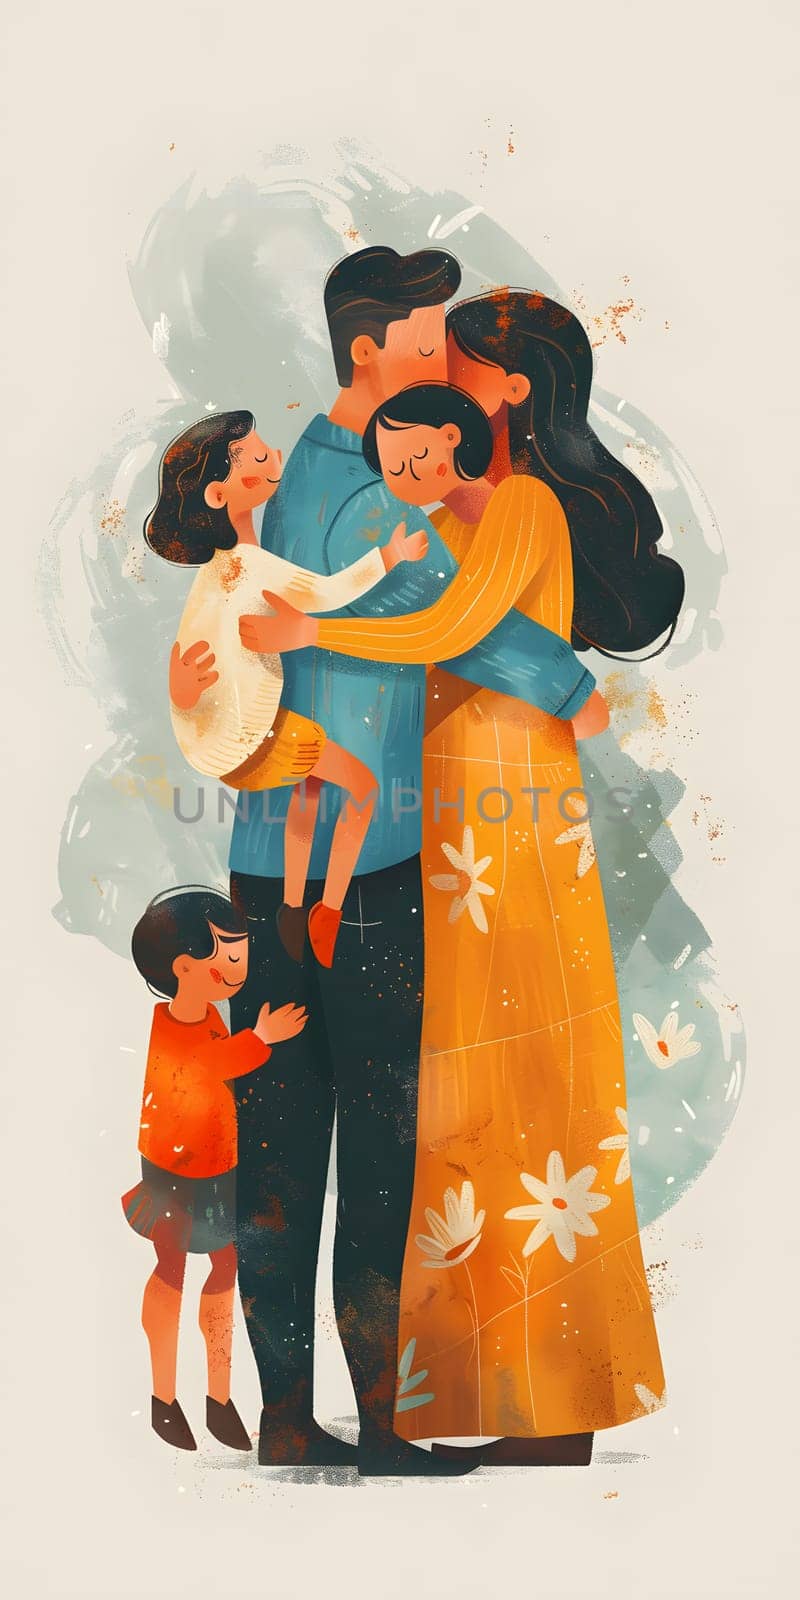 An artist captured the heartwarming moment of a happy family hugging each other in a beautiful painting, showcasing their love and connection